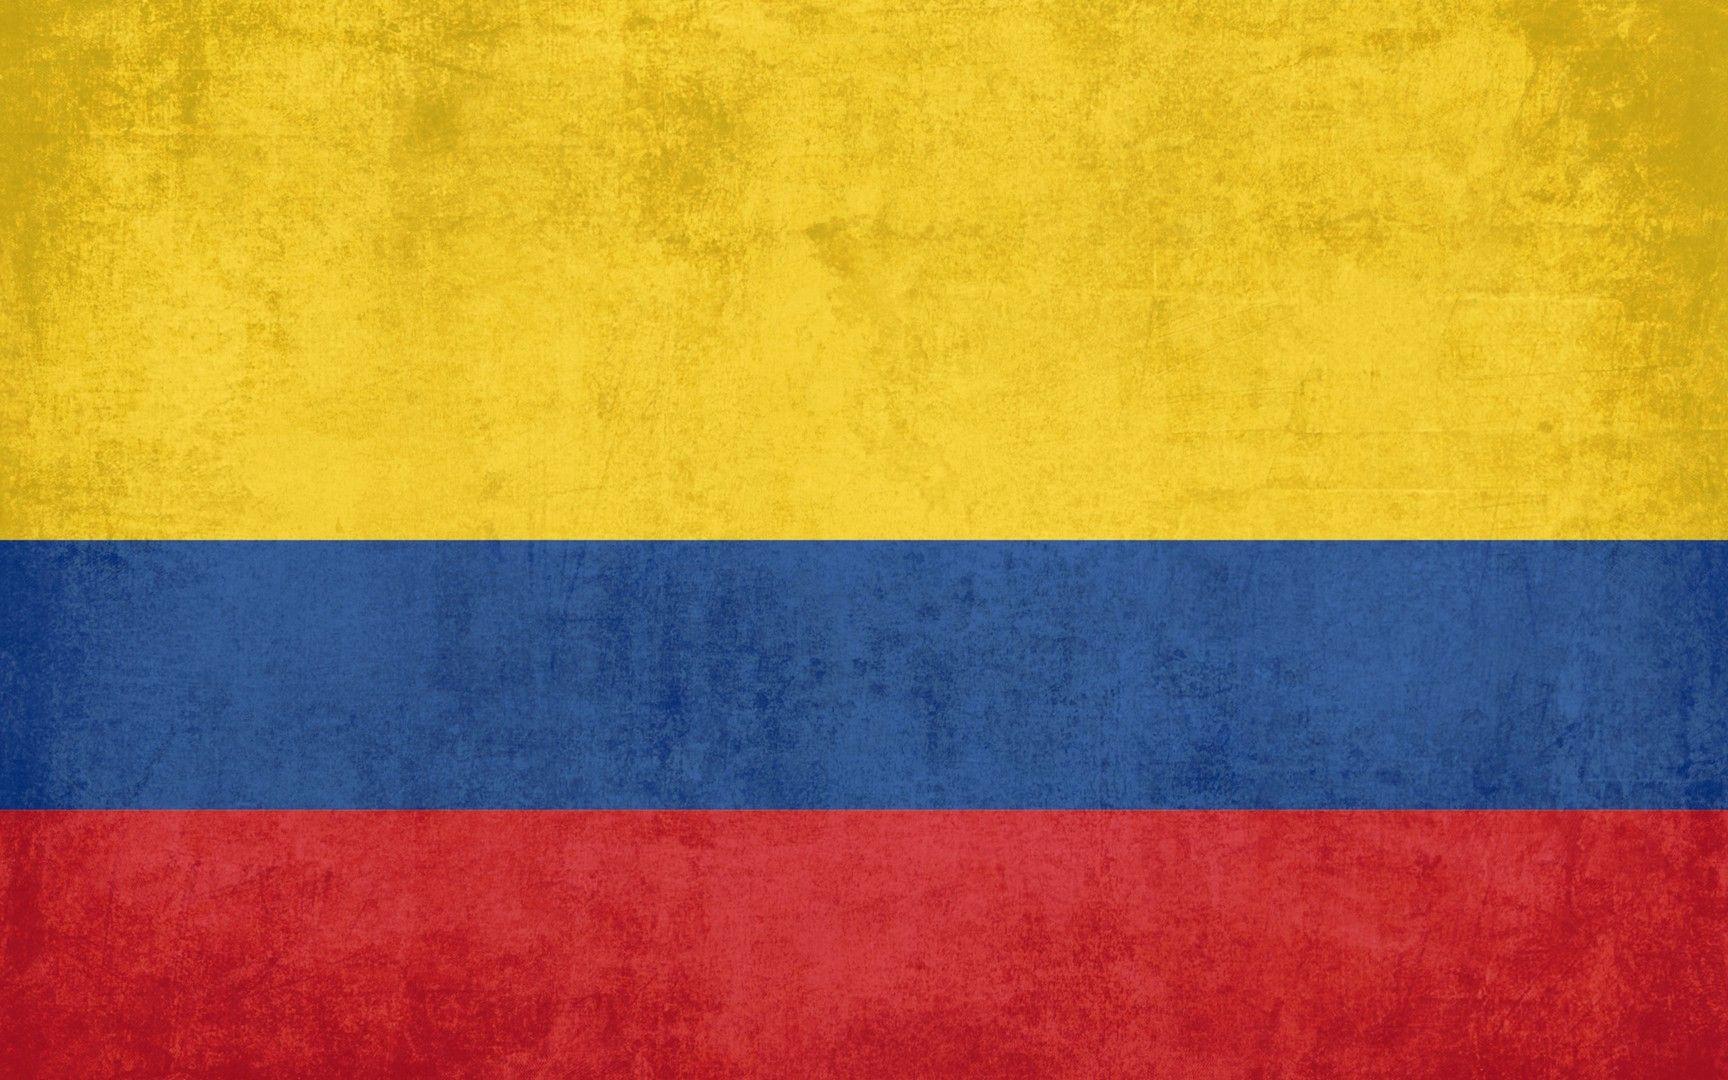 Download wallpapers I love Colombia 4K wooden carving hands Day of  Colombia Colombian flag Flag of Colombia Take care Colombia creative  Colombia flag Colombia flag in hand wood carving South American  countries